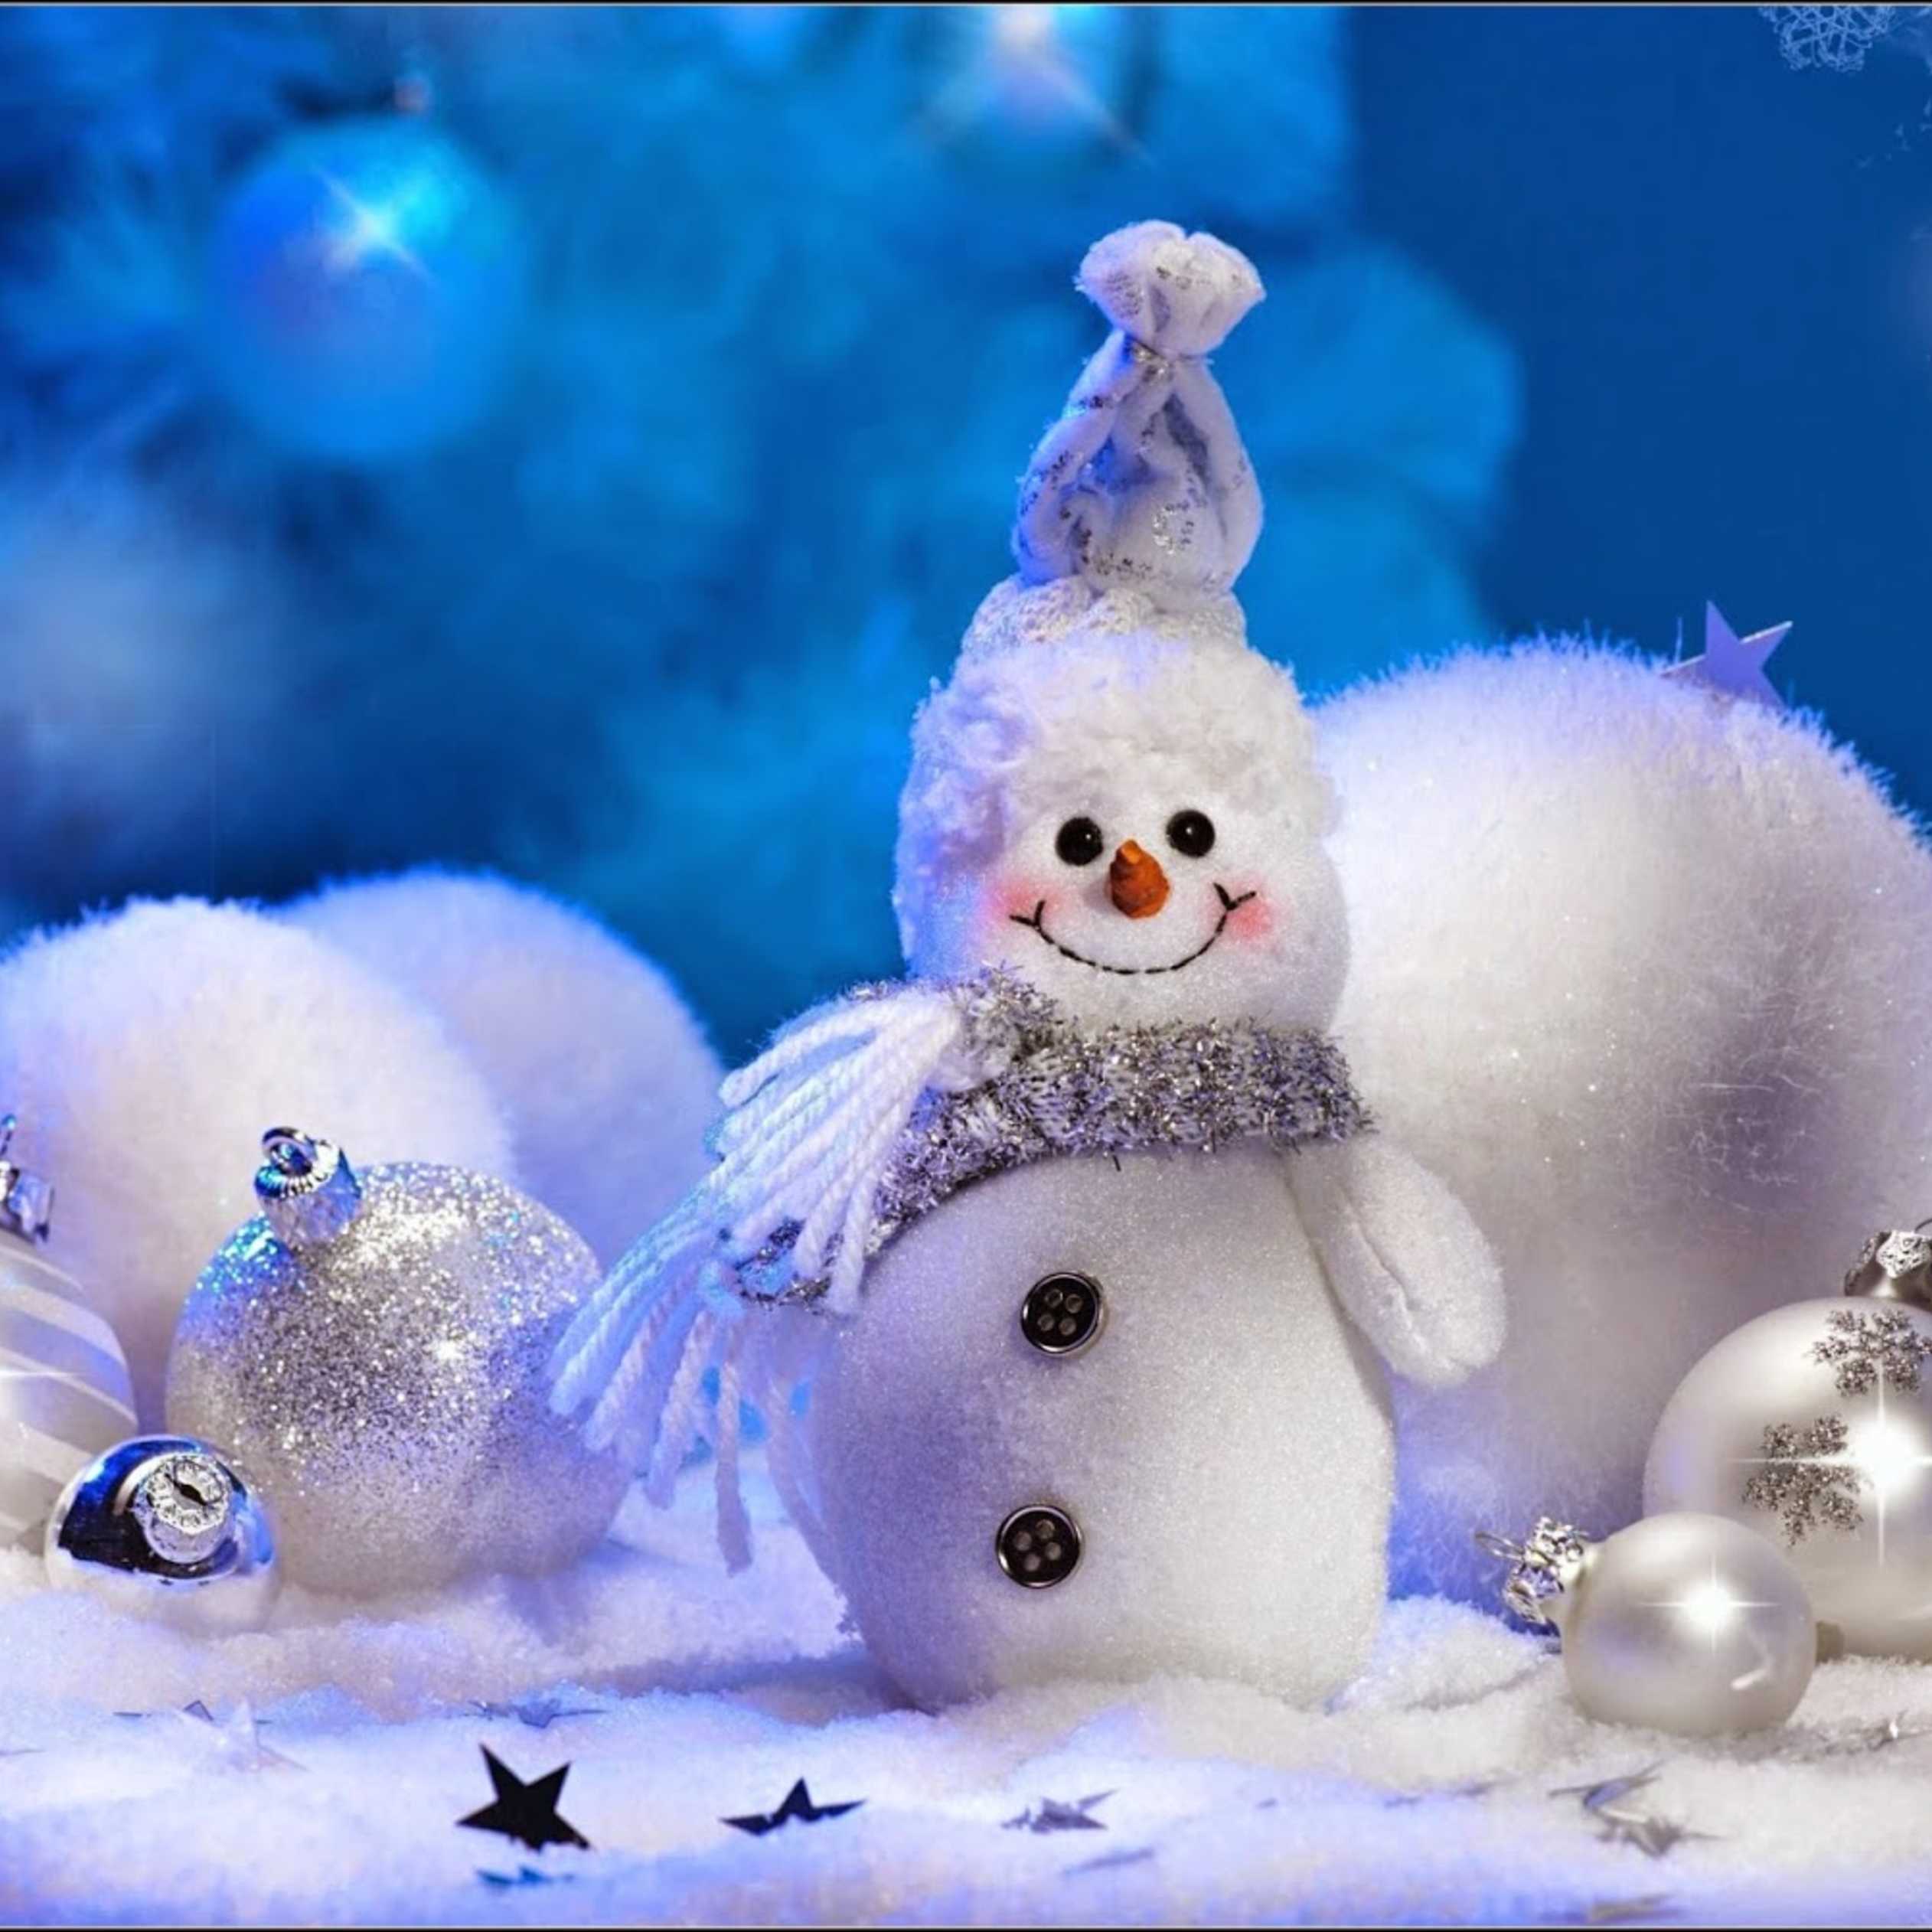 Wallpaper Download 2524x2524 Sweet little snowman and white